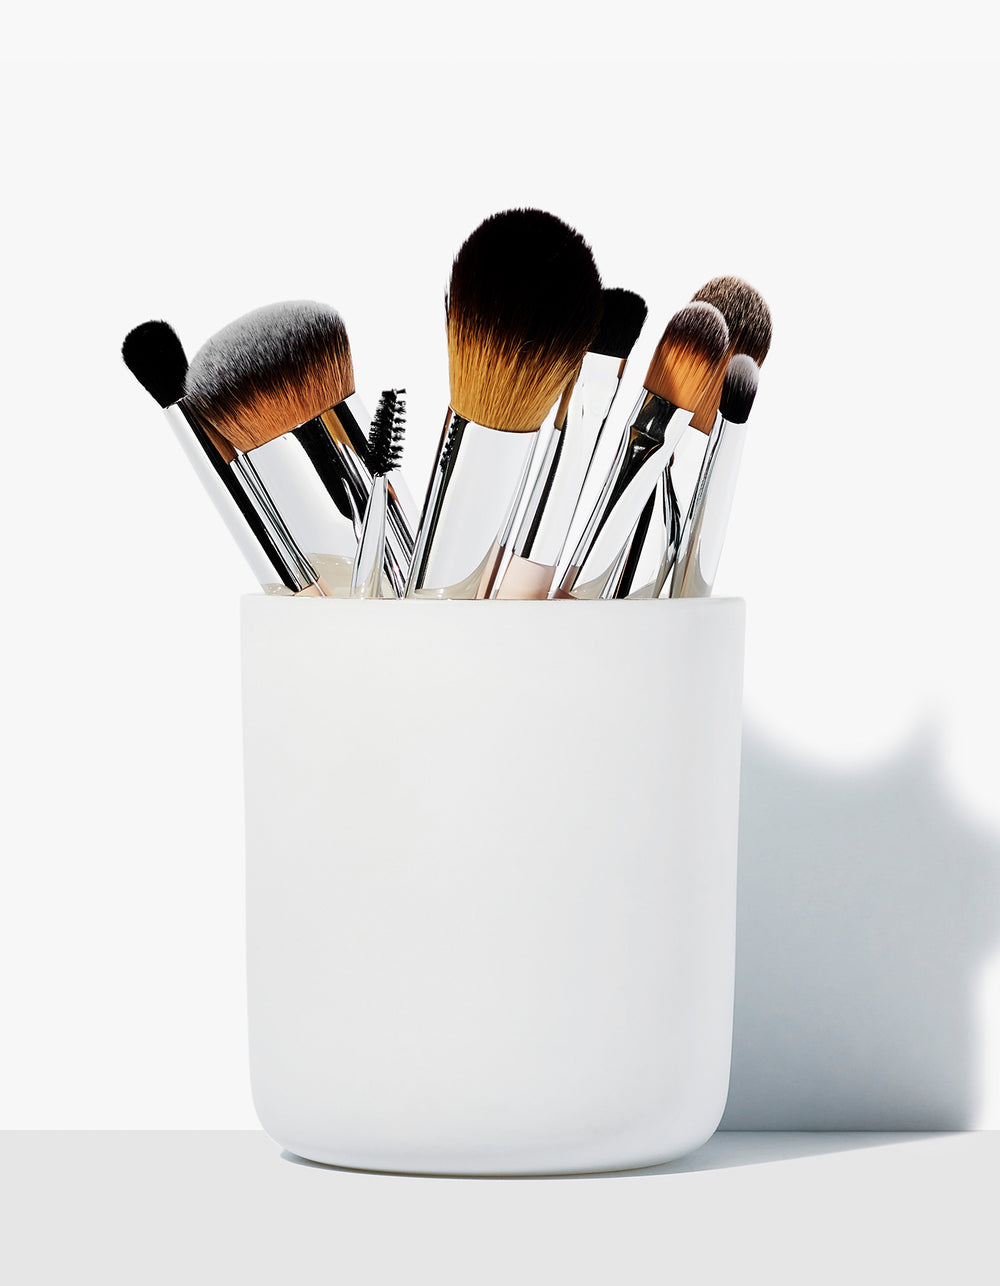 How to Properly Clean Your Makeup Brushes, According to a Makeup Artist